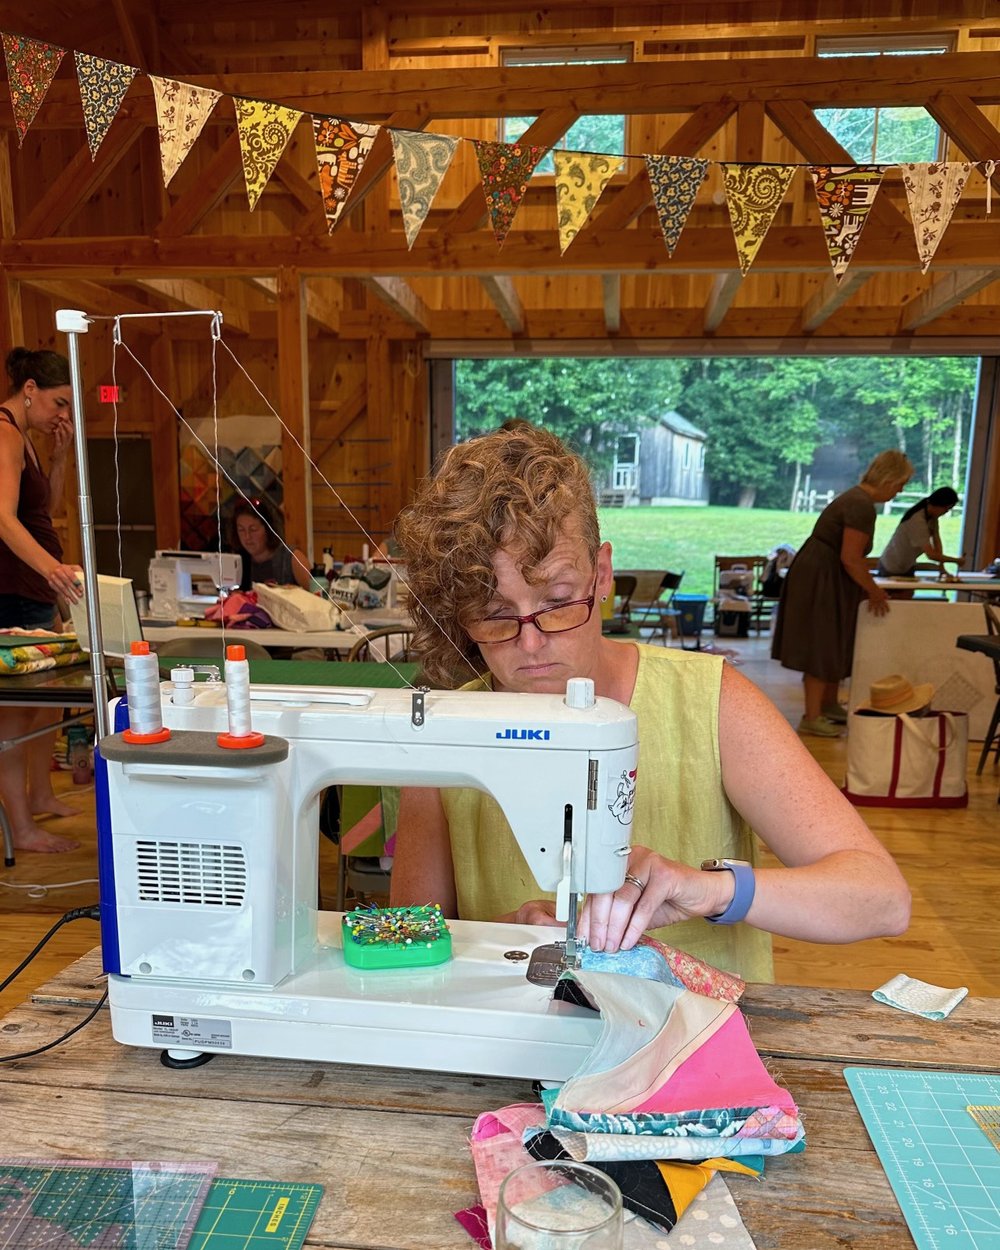 Sewing in the barn